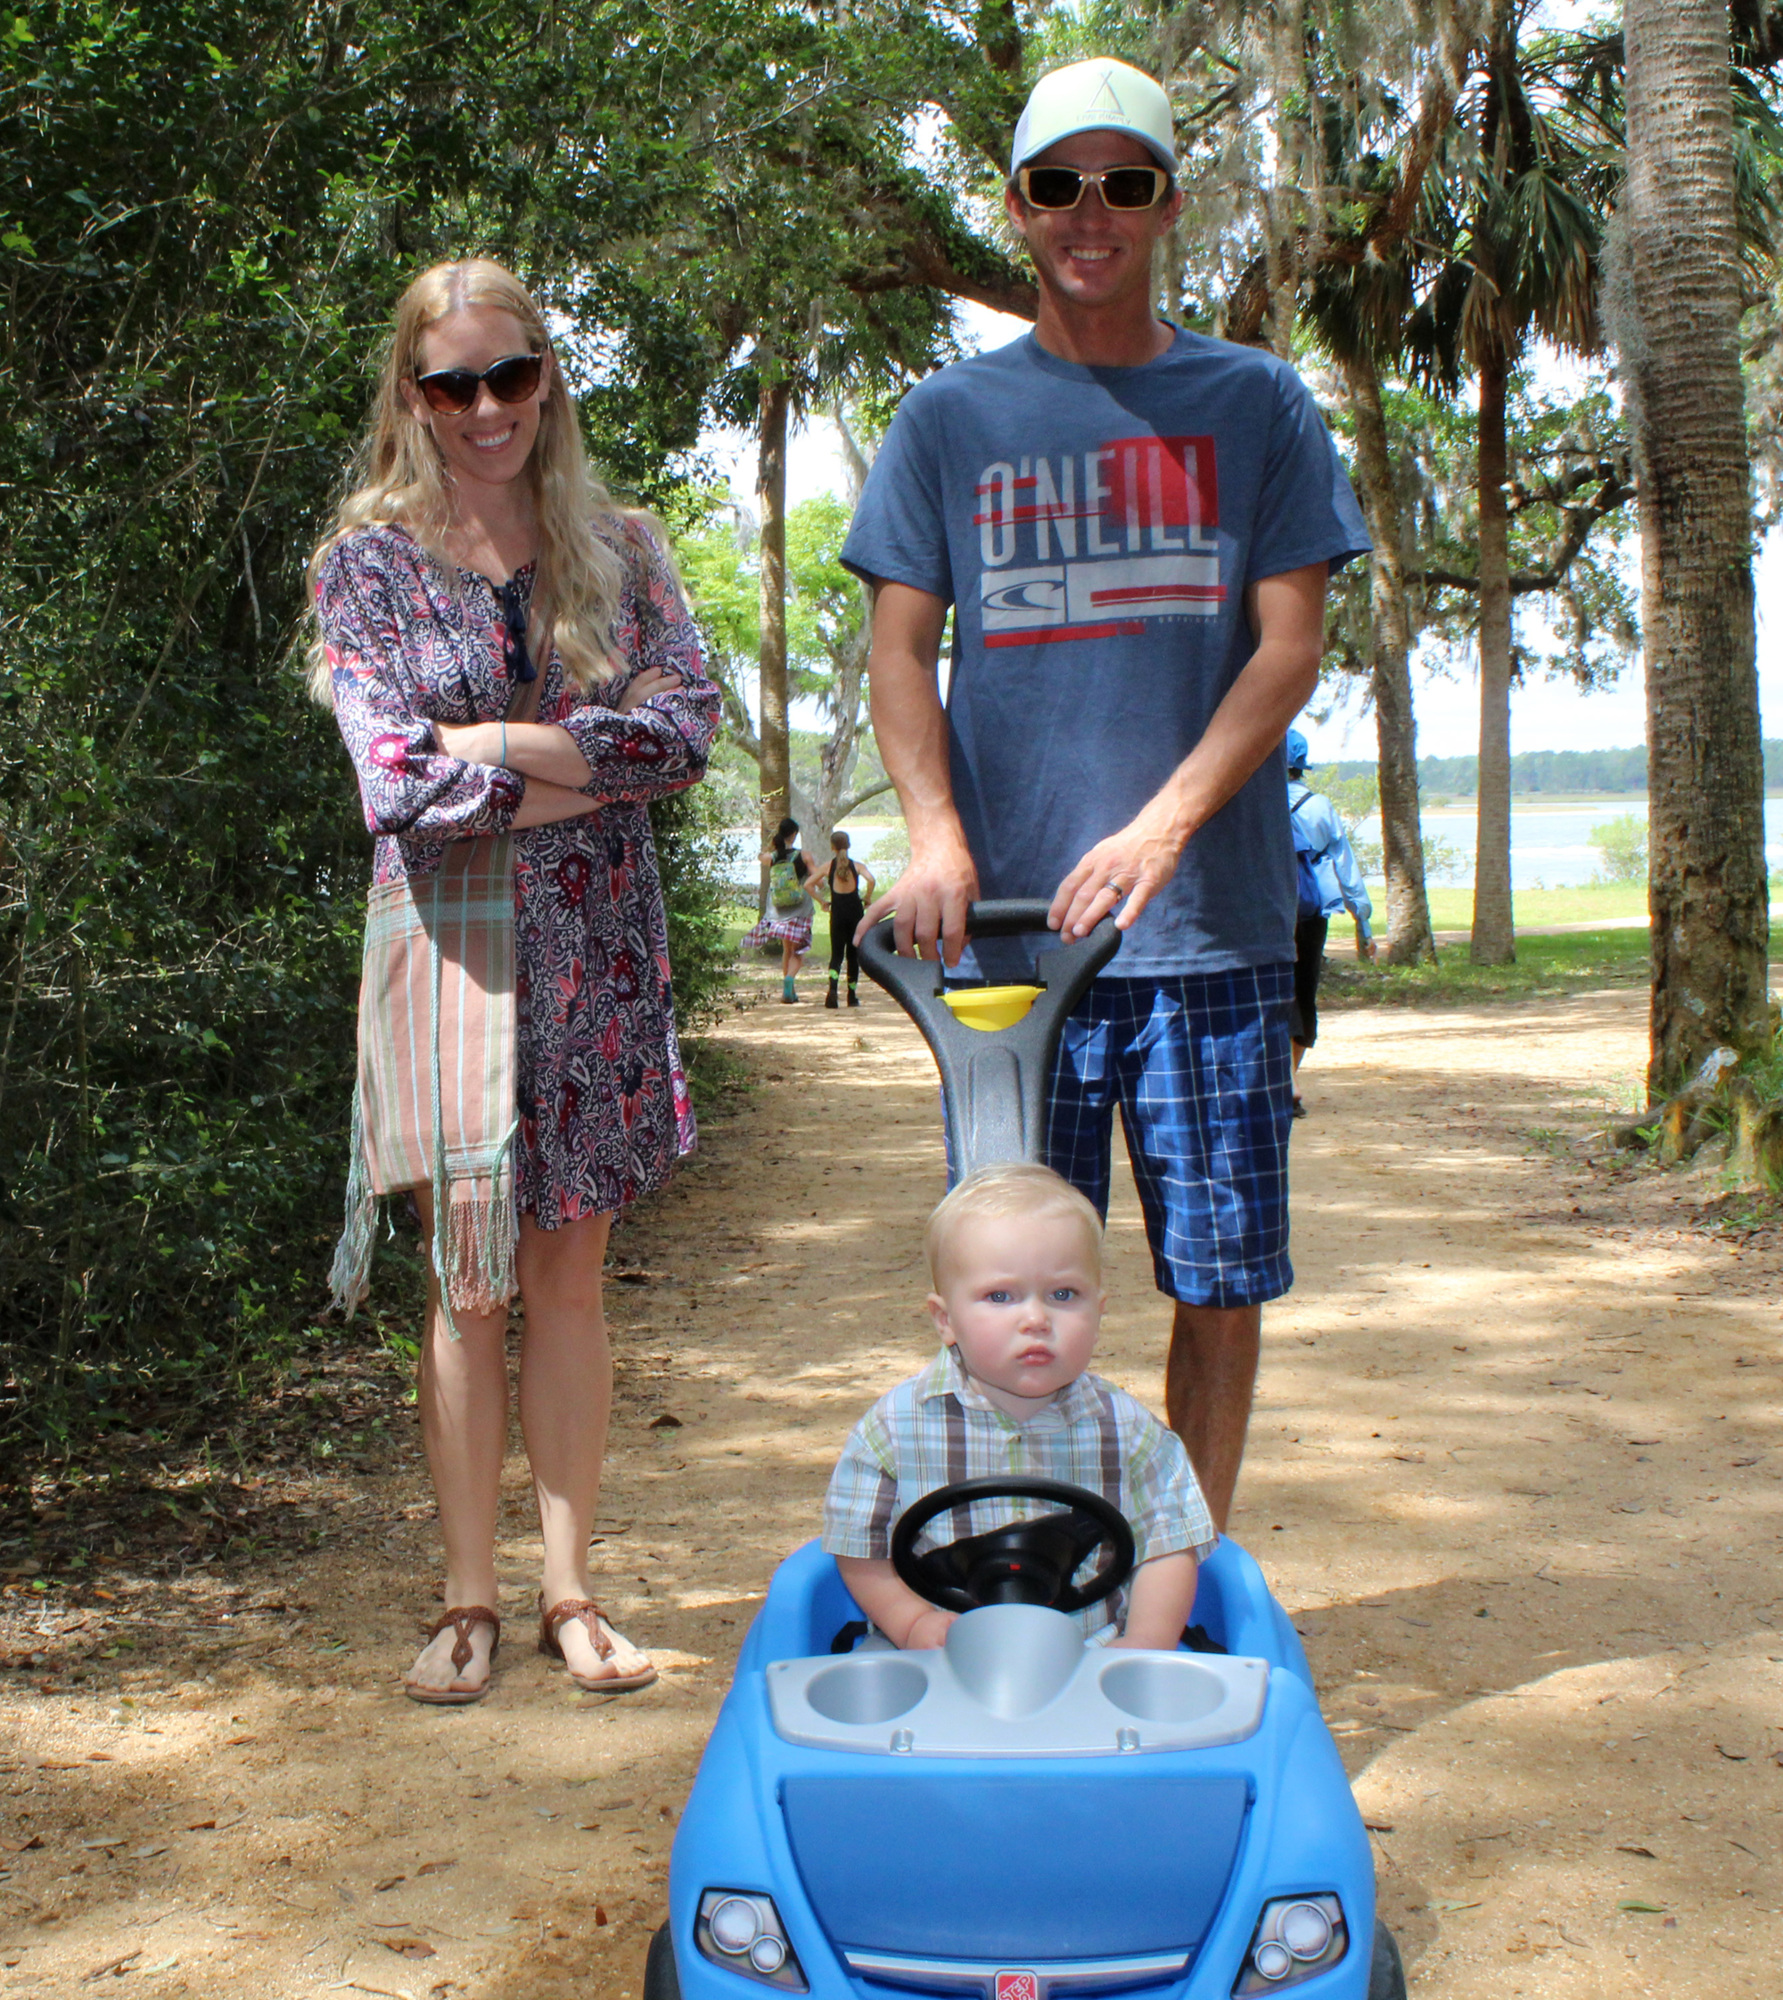 Jenni and Kris Smith, of St. Augustine,  enjoy the day with their son, Merrick. Photo by Jacque Estes